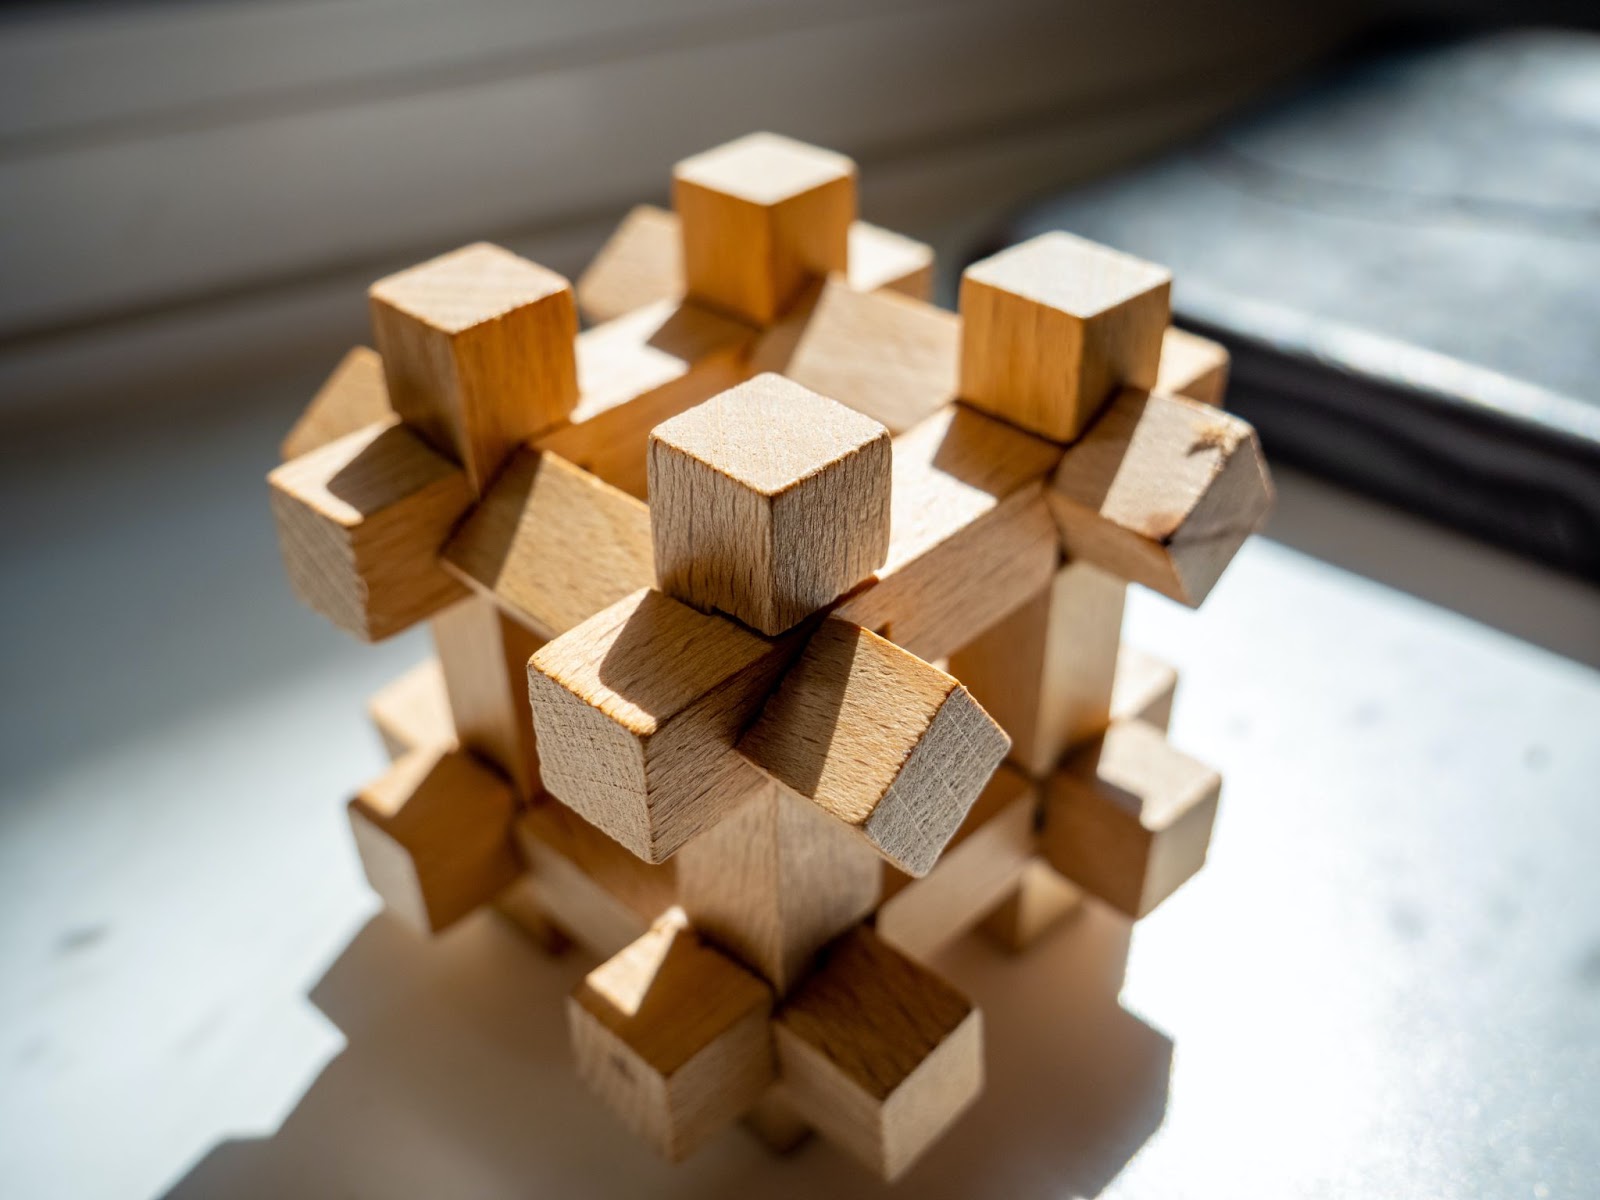 Stacked Puzzle Made Out of Wooden Pieces